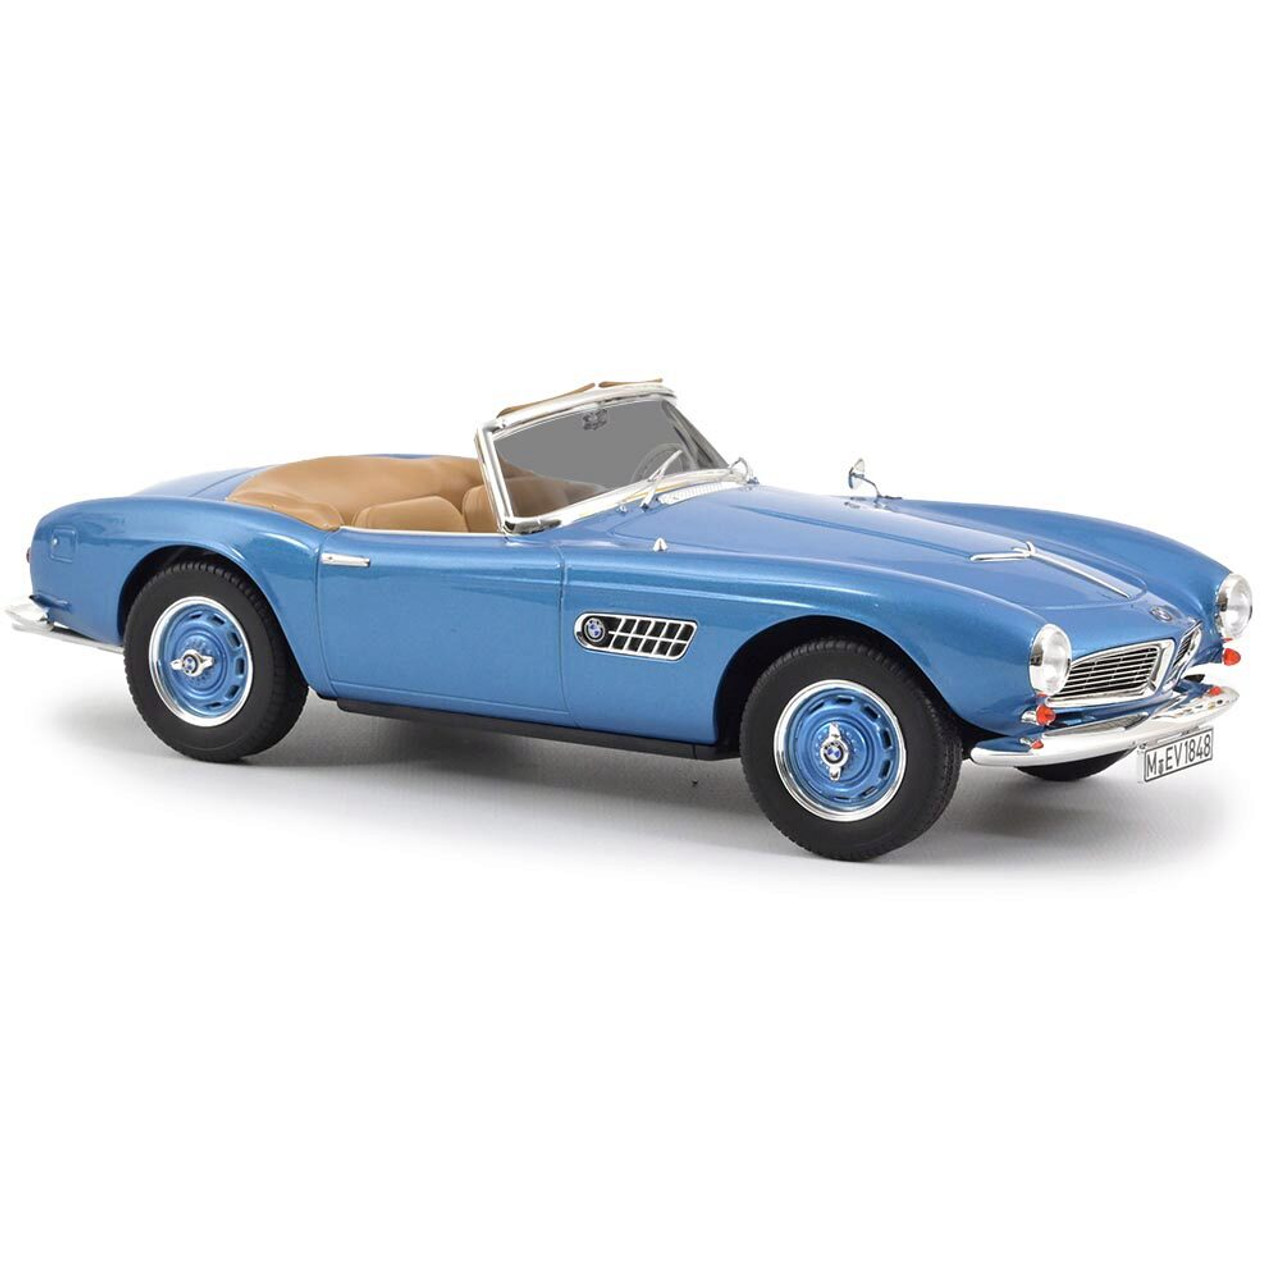 1957 BMW 507 Cabriolet - Blue 1:18 Scale Diecast Model Car by Norev